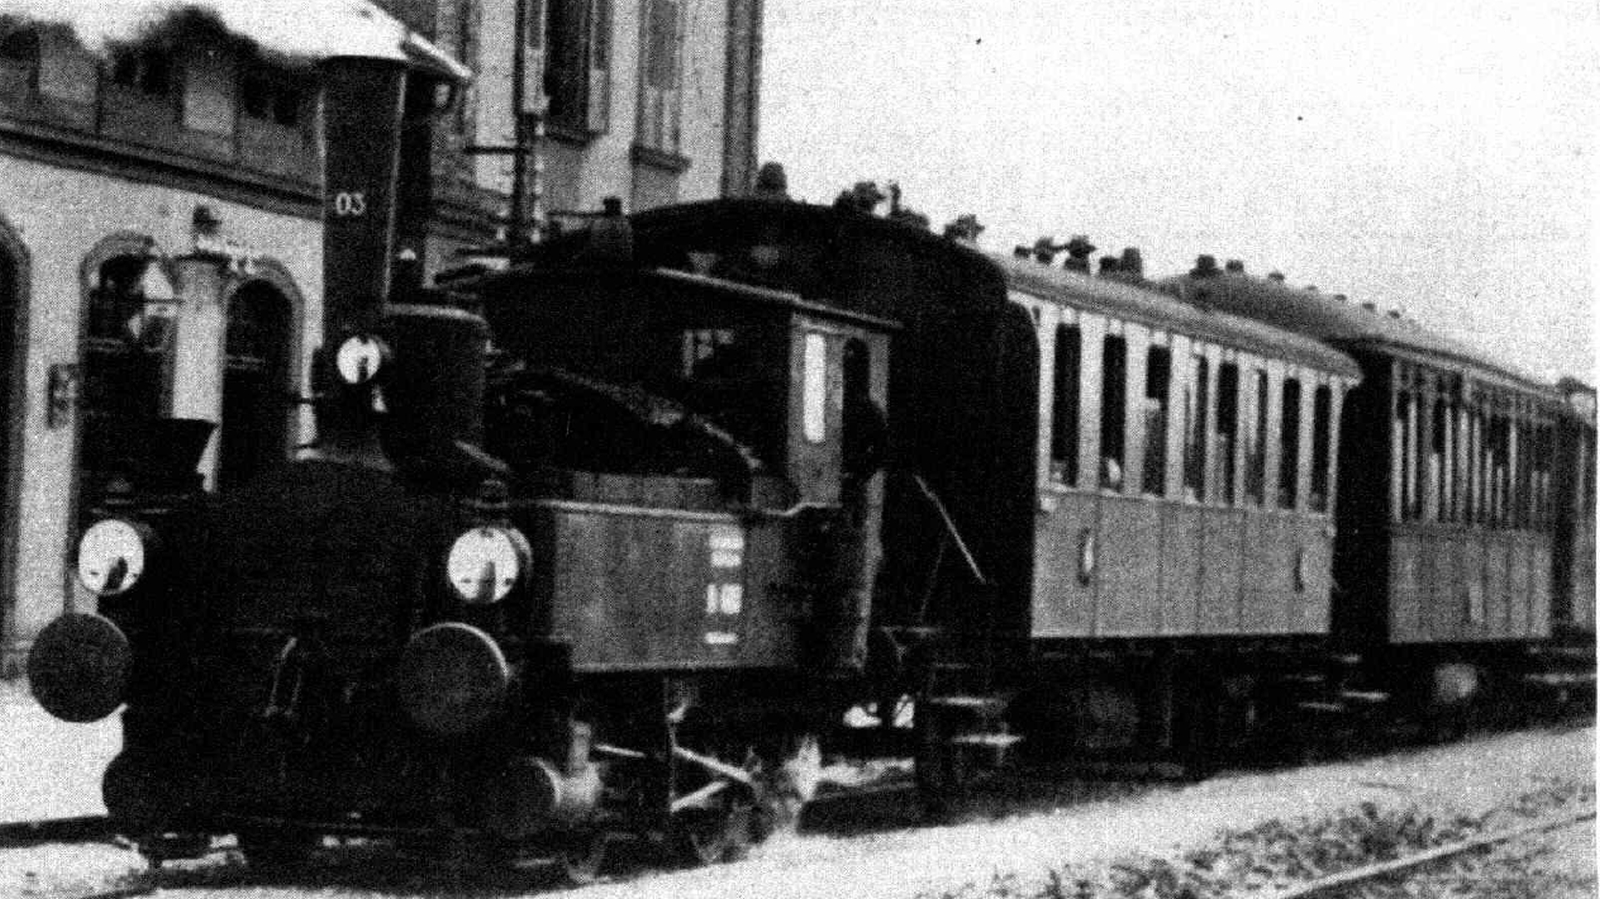 Badische machine with a driver's cab later added